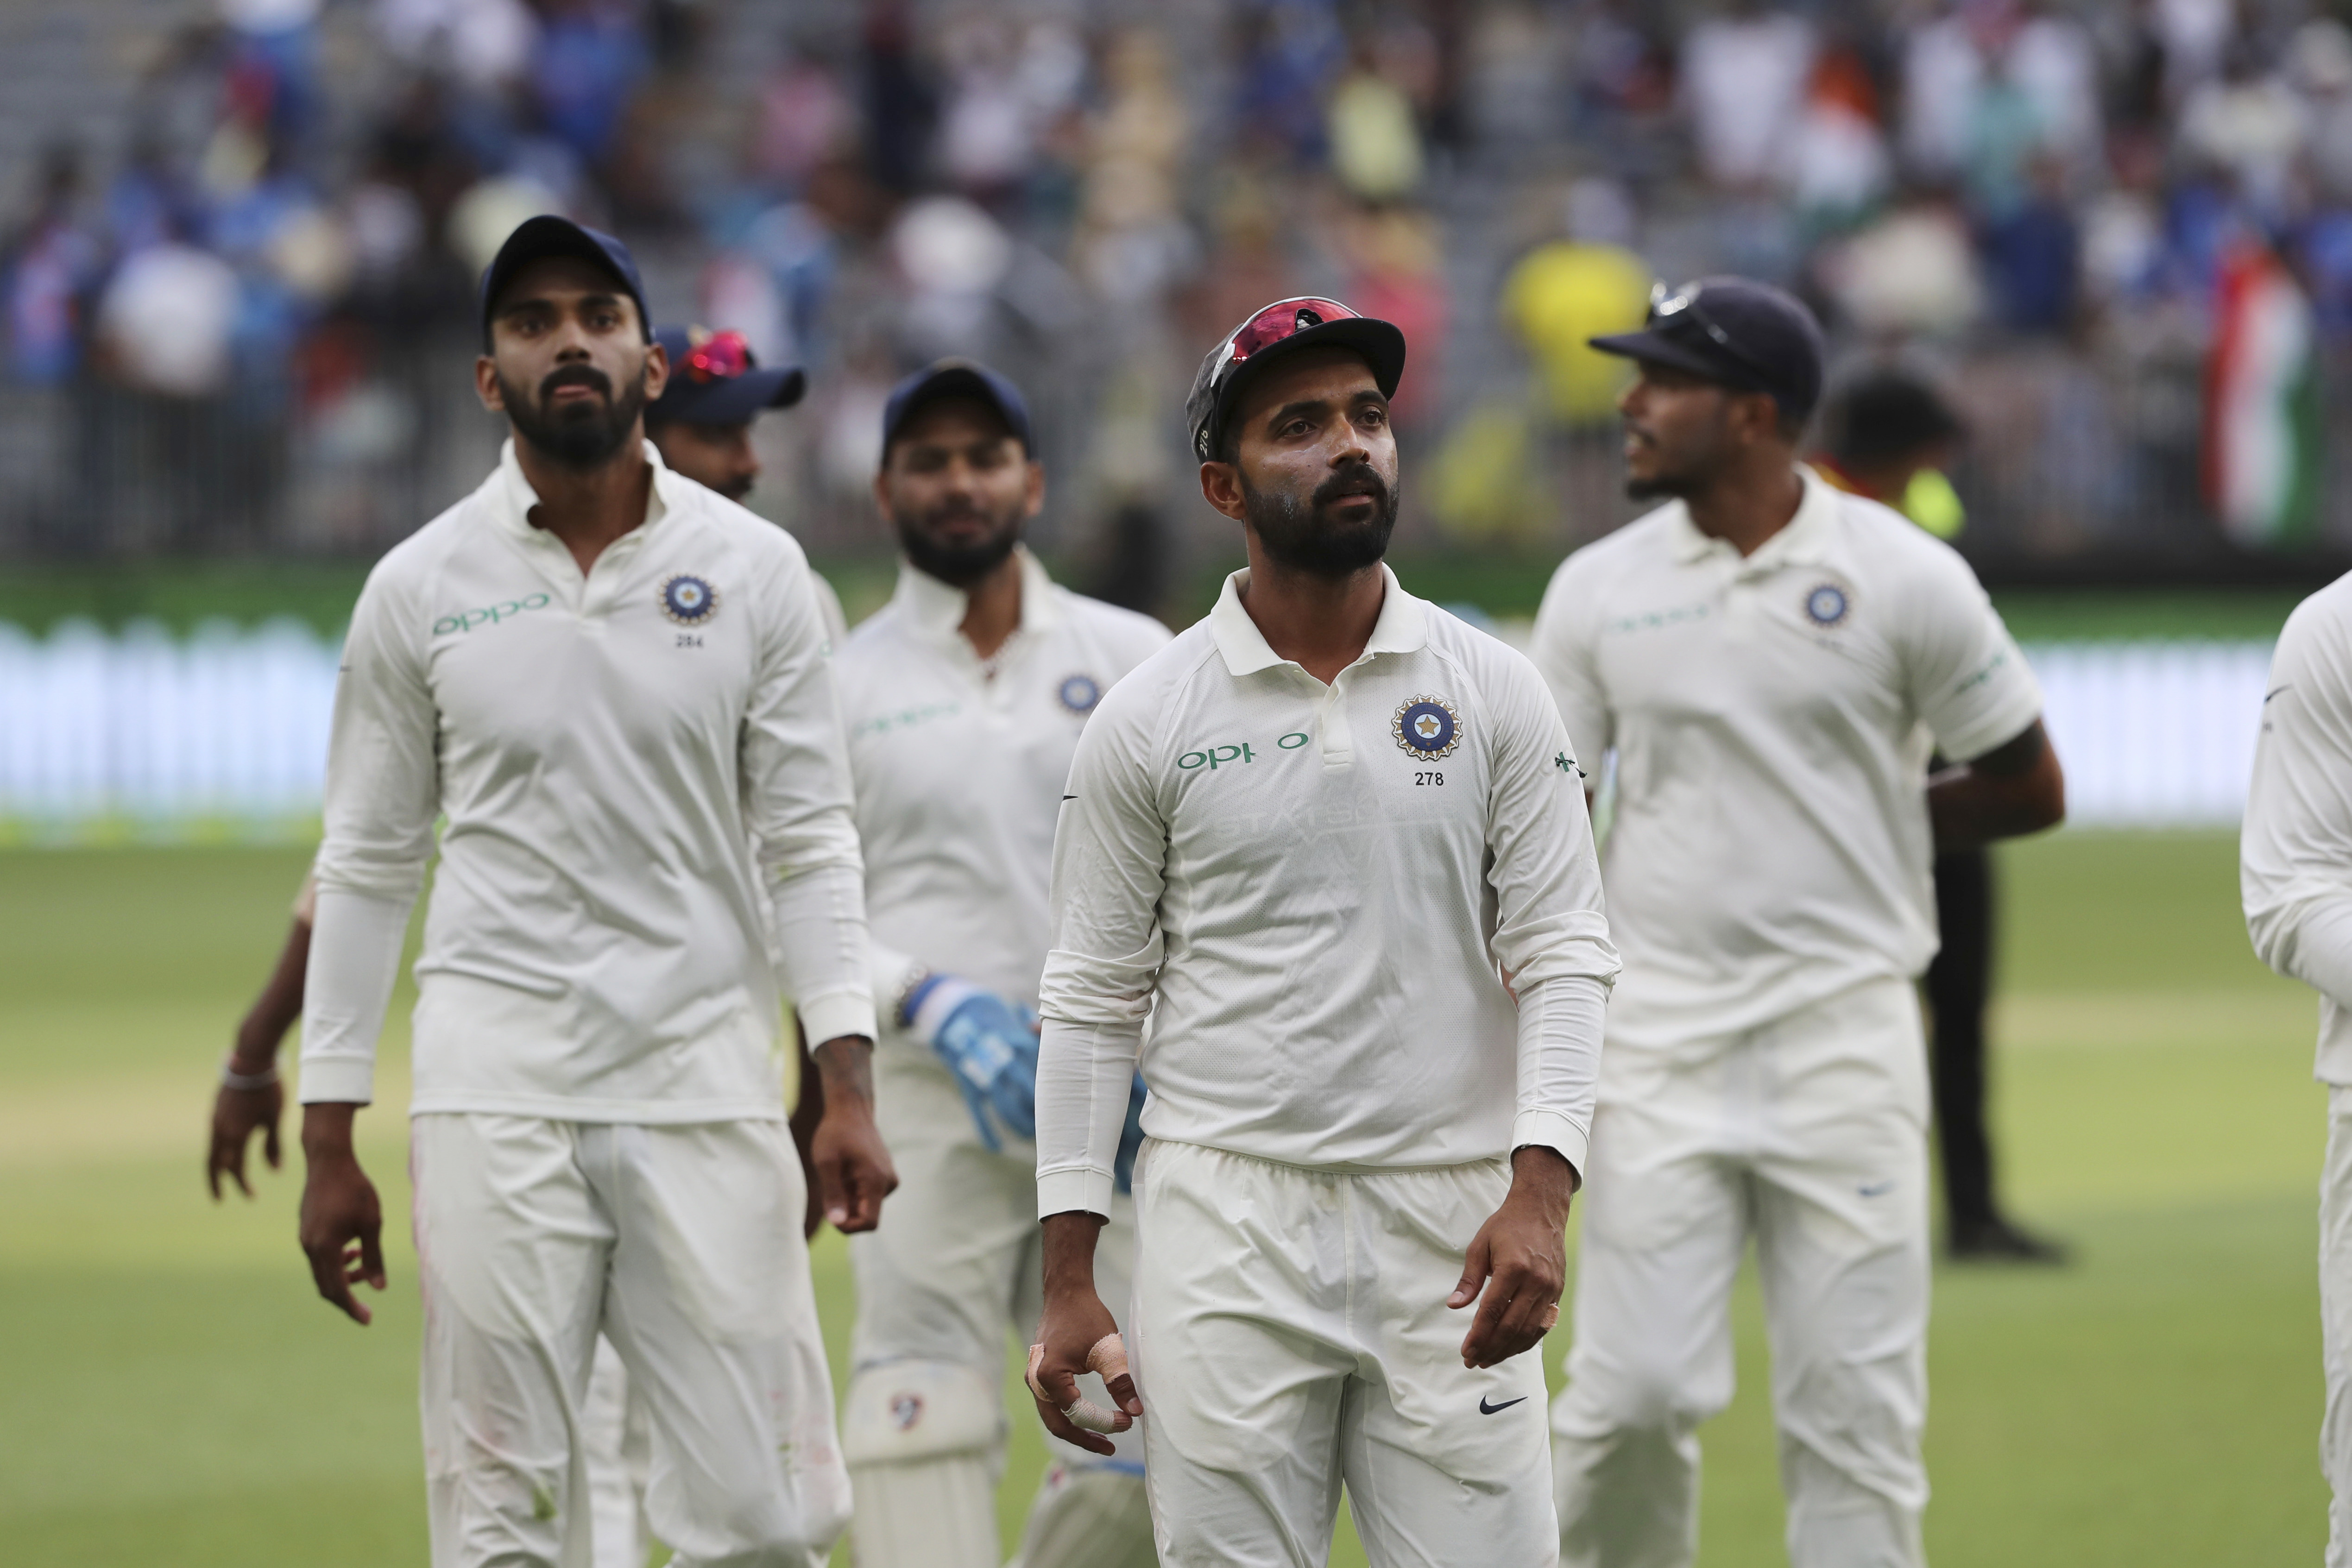 India's Ajinkya Rahane, second right, leads his teammates off the ground at the conclusion of the third days play in the second cricket test between Australia and India in Perth, Australia - AP